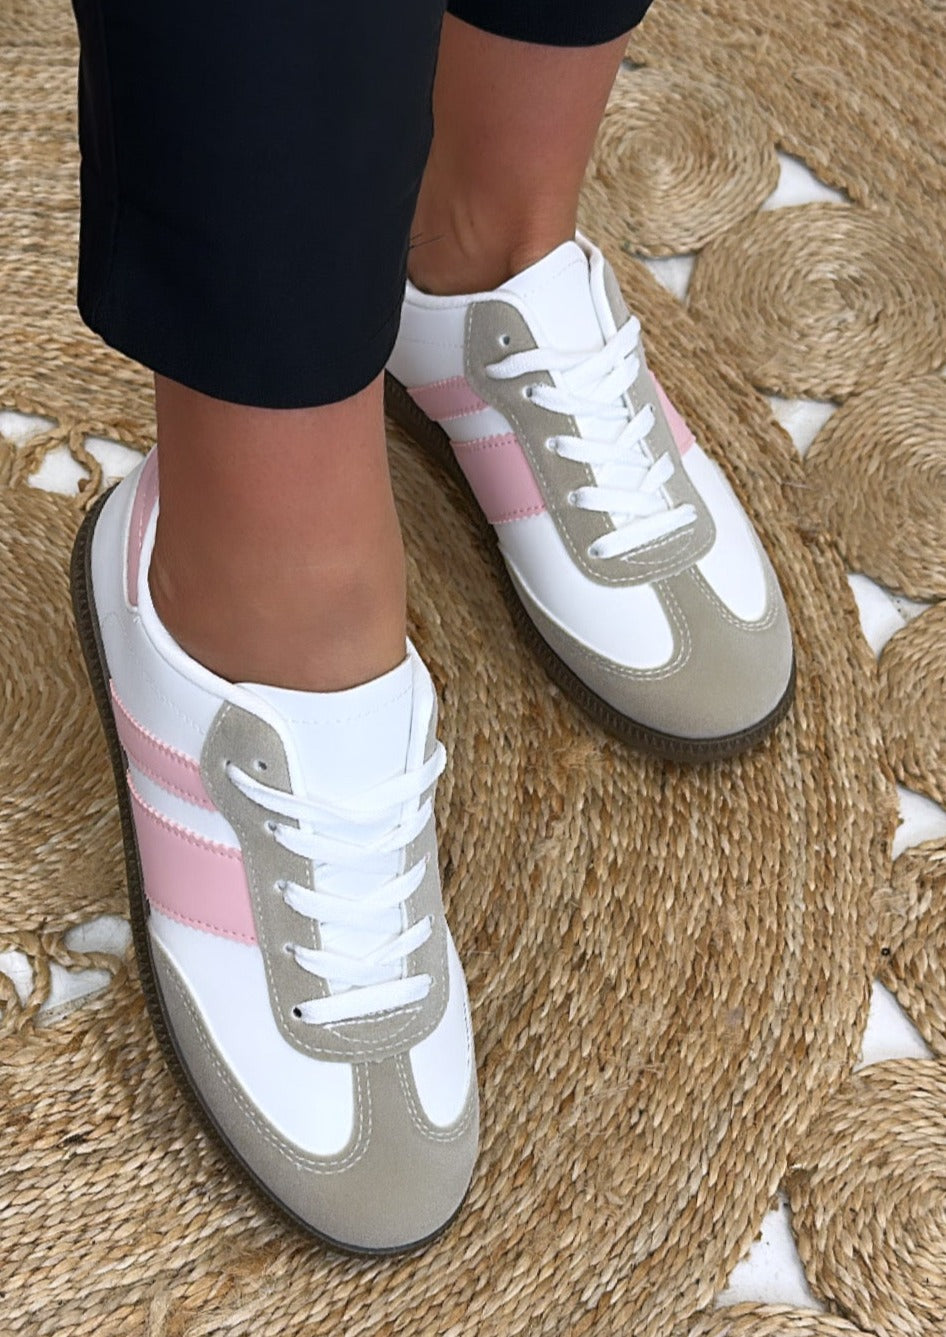 Larsa White/Pink Lace Up Sneakers